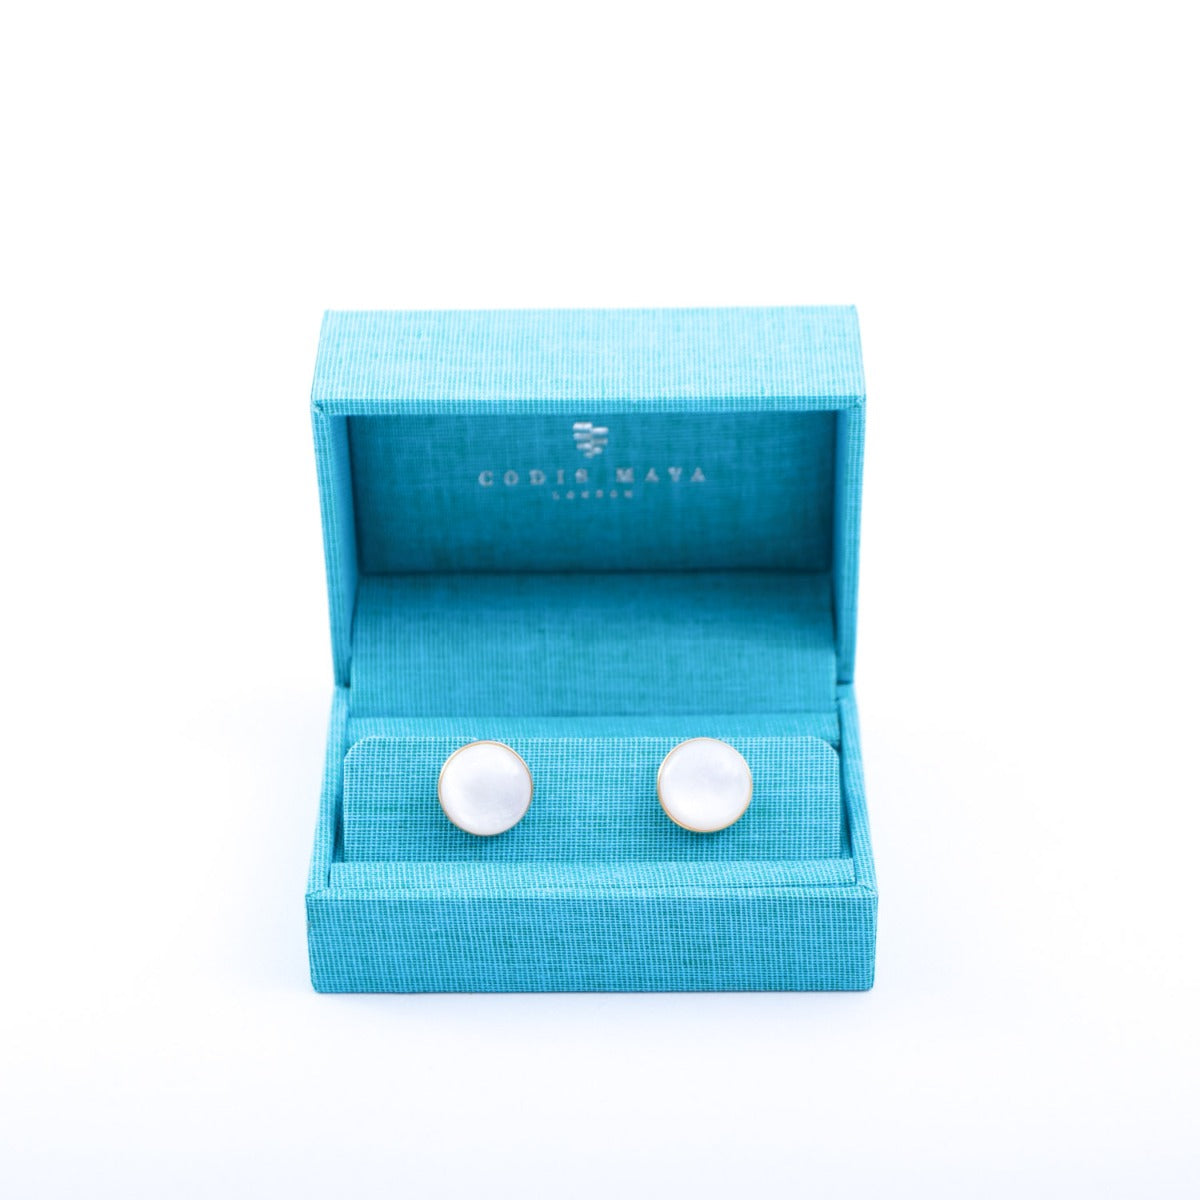 A pair of Indonesian Mother of Pearl Gold Stone Capsule Cufflinks from KirbyAllison.com in a blue box.